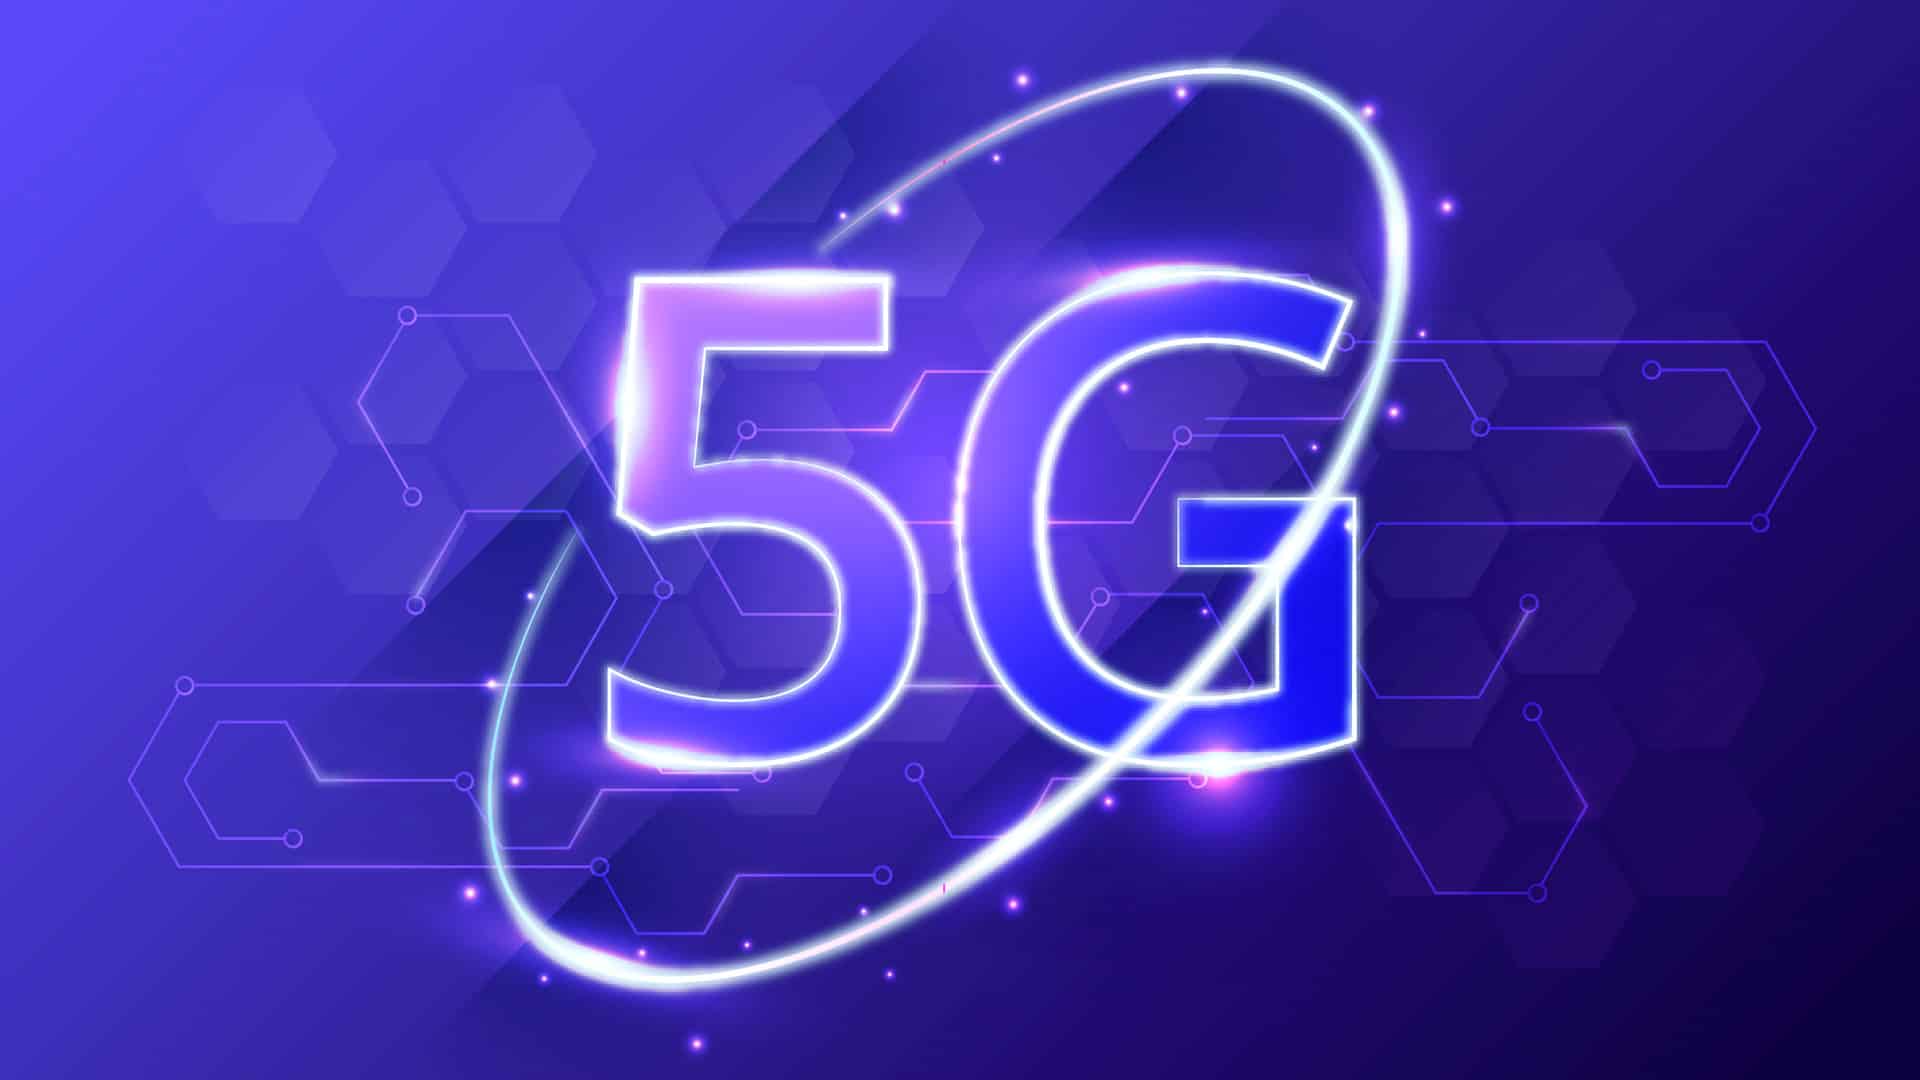 Record Rs 1.5 lakh cr from 5G spectrum sale; Jio top bidder